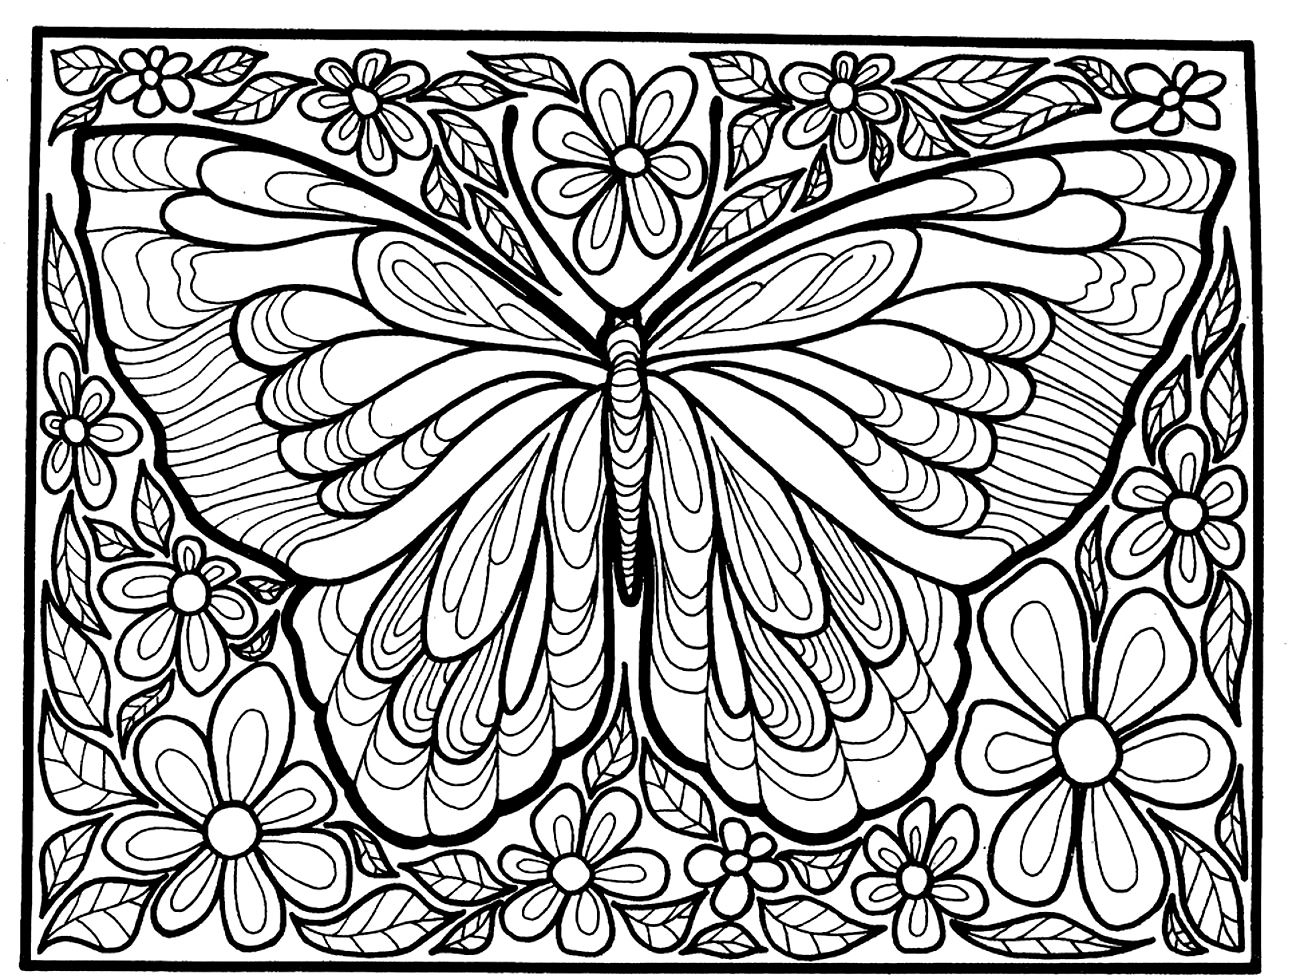 Butterfly Insects Coloring Page